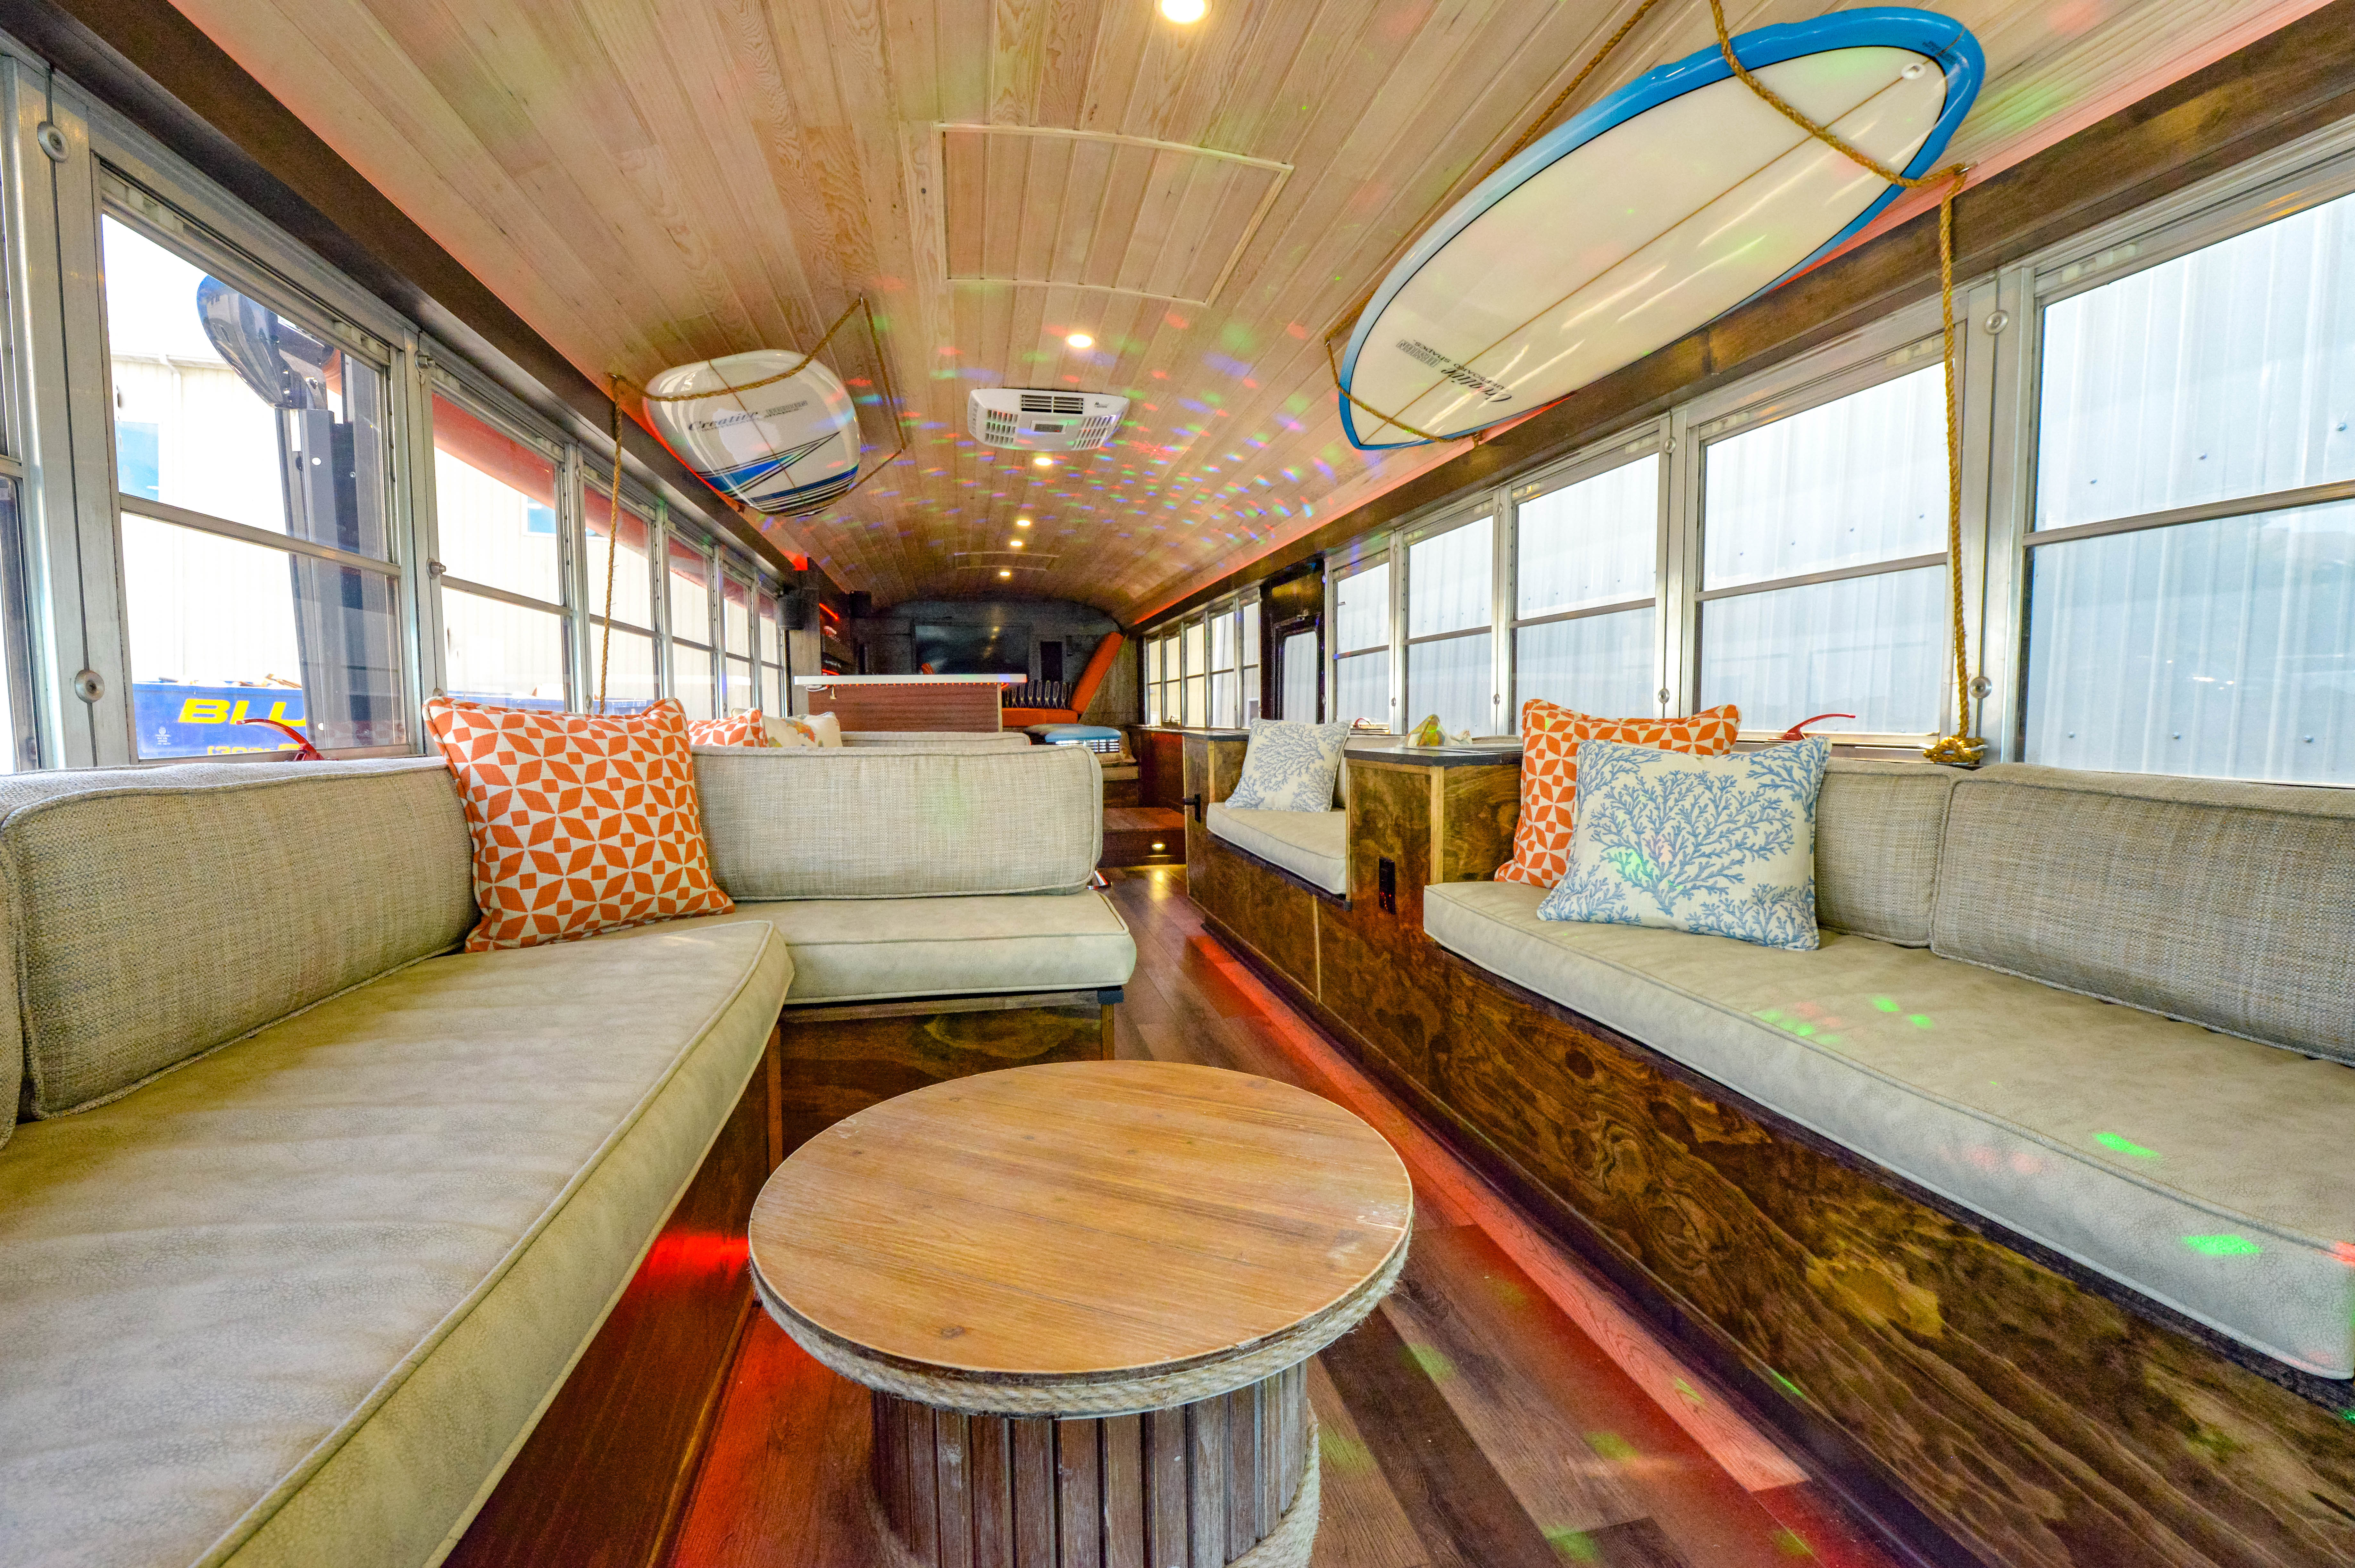 The interior of the Kudos Bus, known as the Kudos Lounge